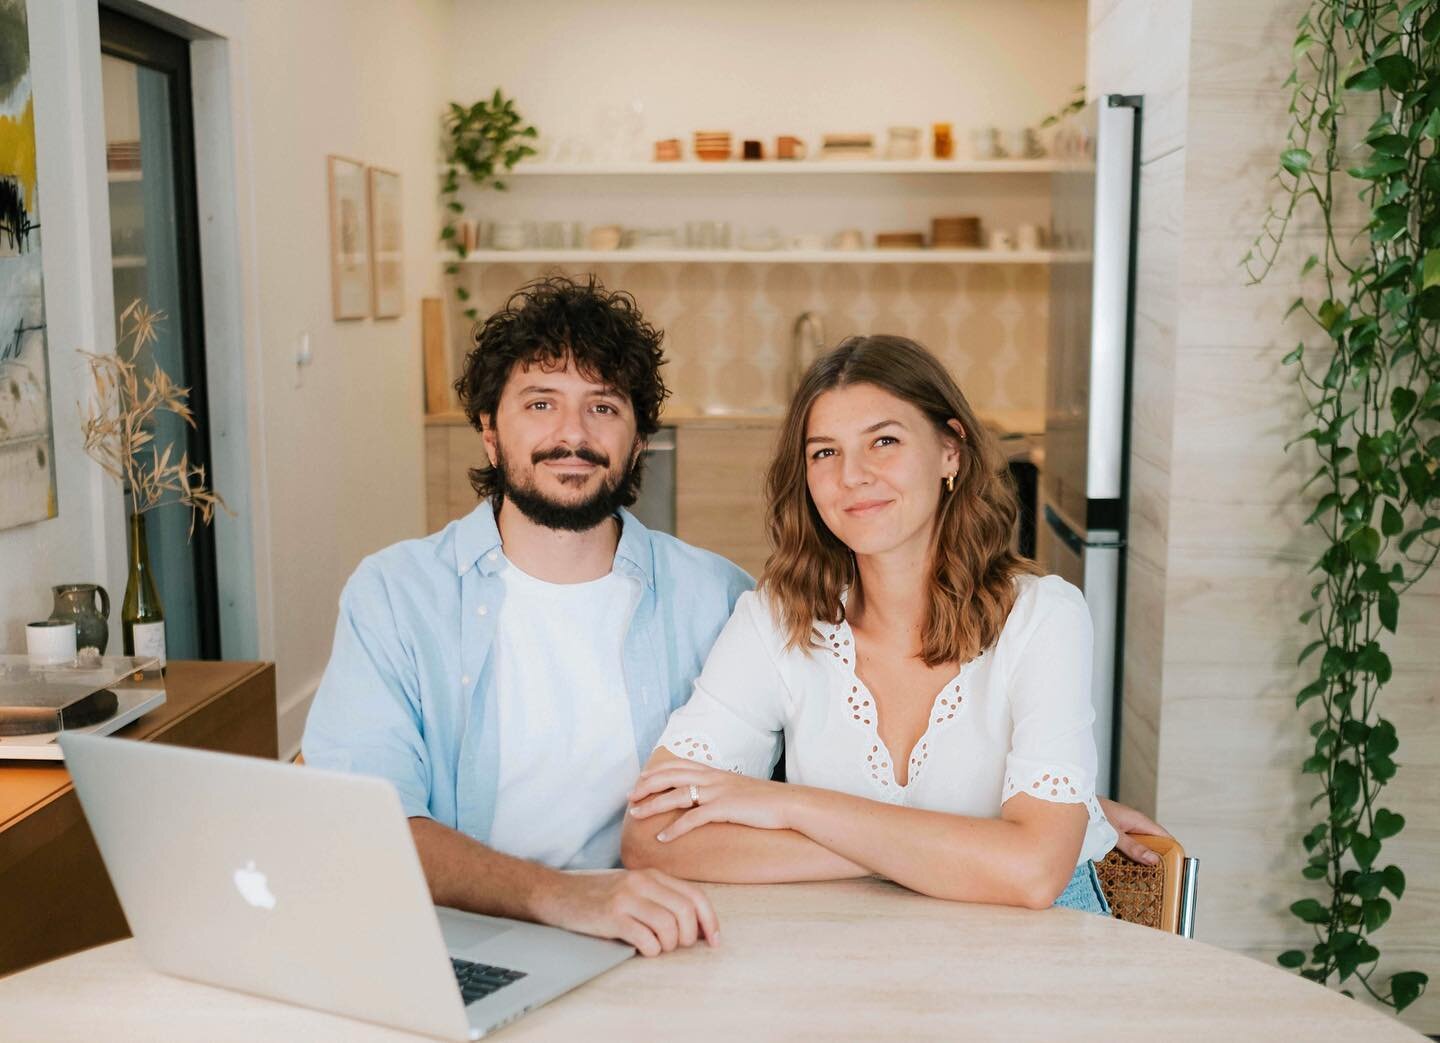 Today we sent out our last newsletter with a pretty big life update inside.

In 2023, Jes&uacute;s and I (Anna) will be intentionally stepping away from Chez N&uacute;&ntilde;ez and toward our heart&rsquo;s deepest callings.

I&rsquo;ll be focusing a